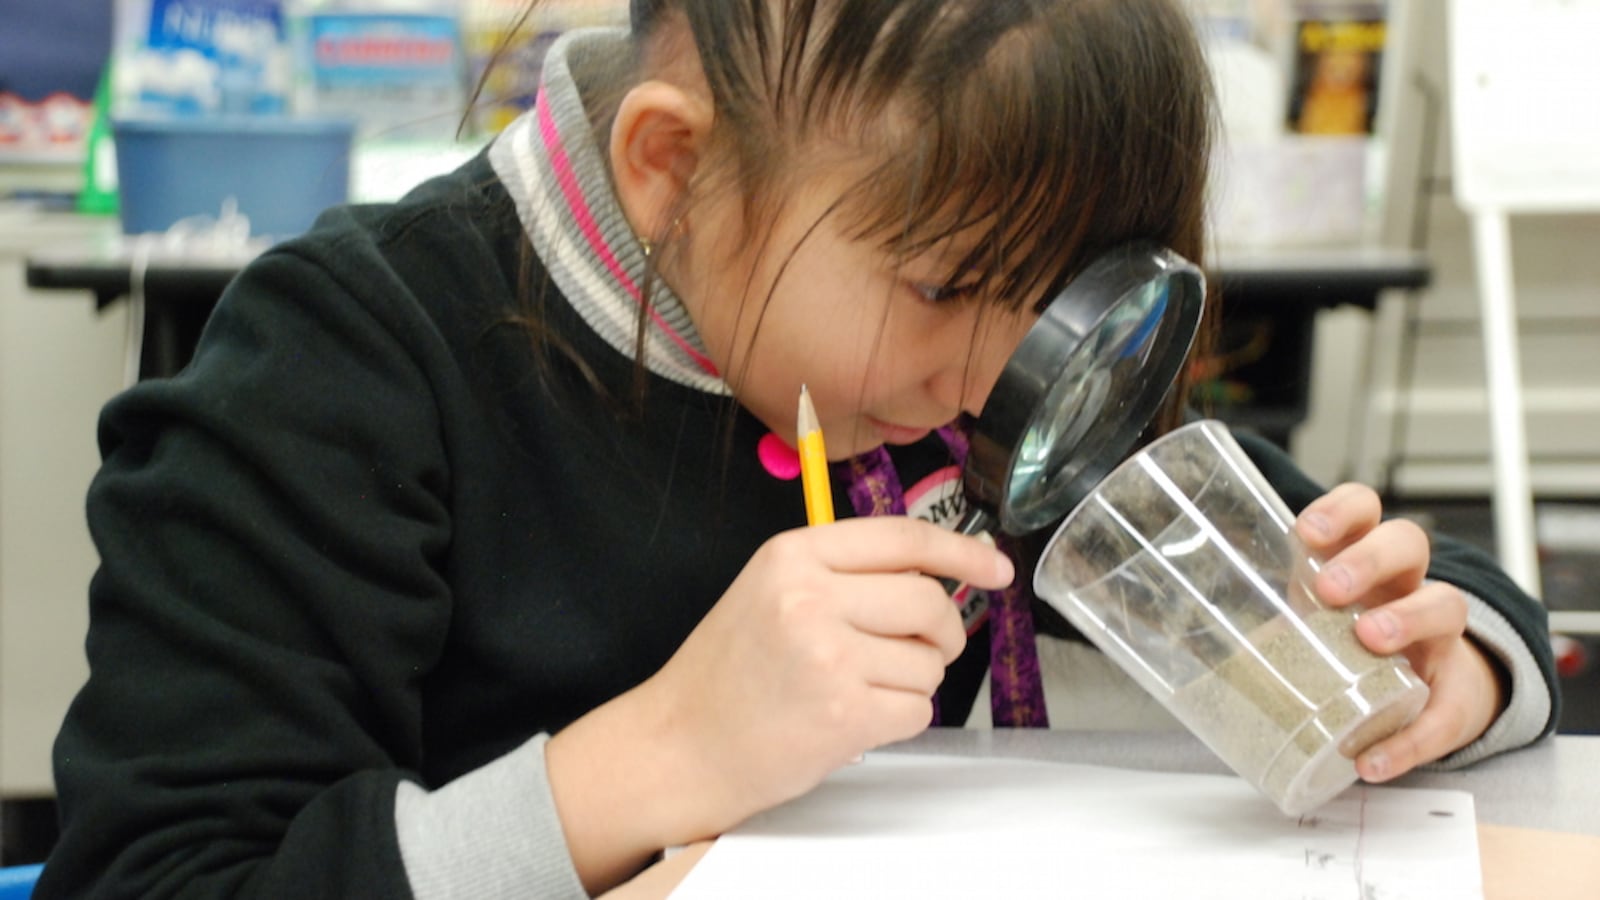 A Lumberg Elementary School student exams sand as part of an experiment.